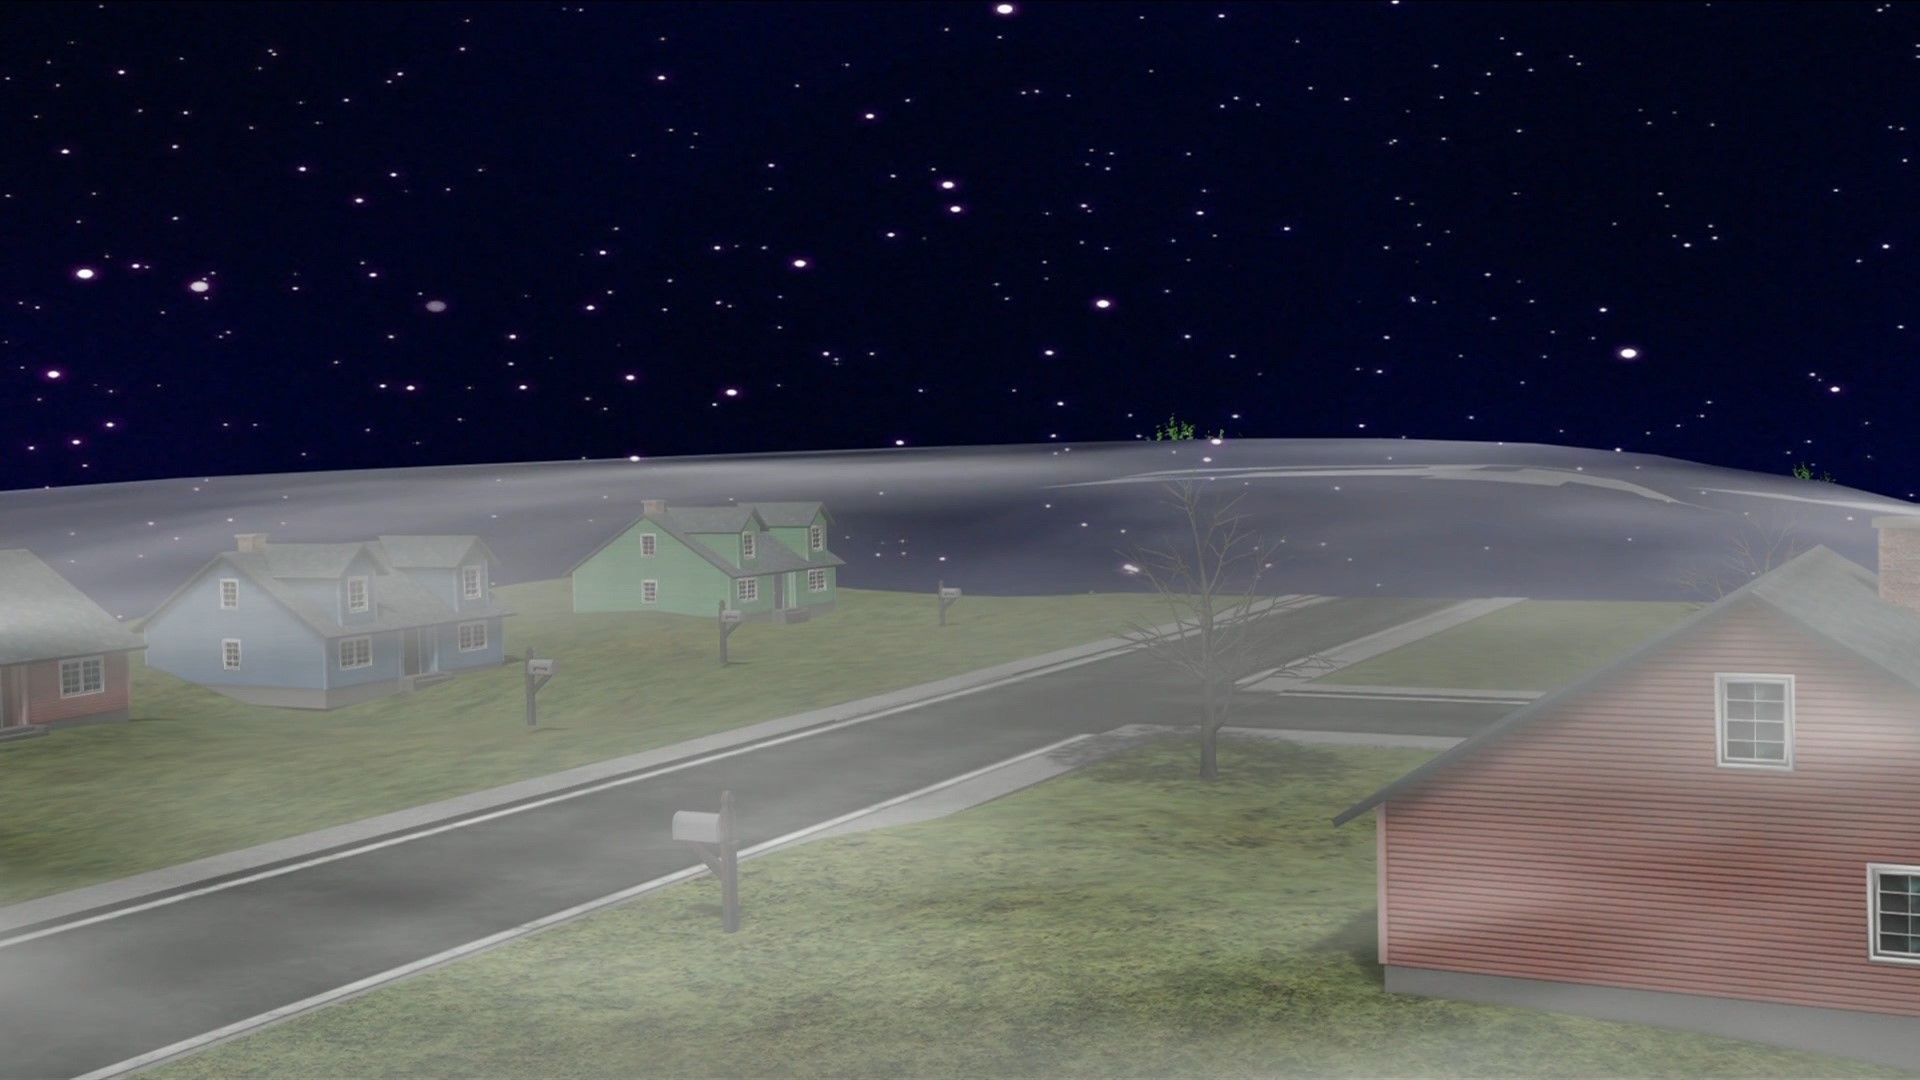 Fog is common in Iowa, especially during the winter months. But do you know why and how it forms?